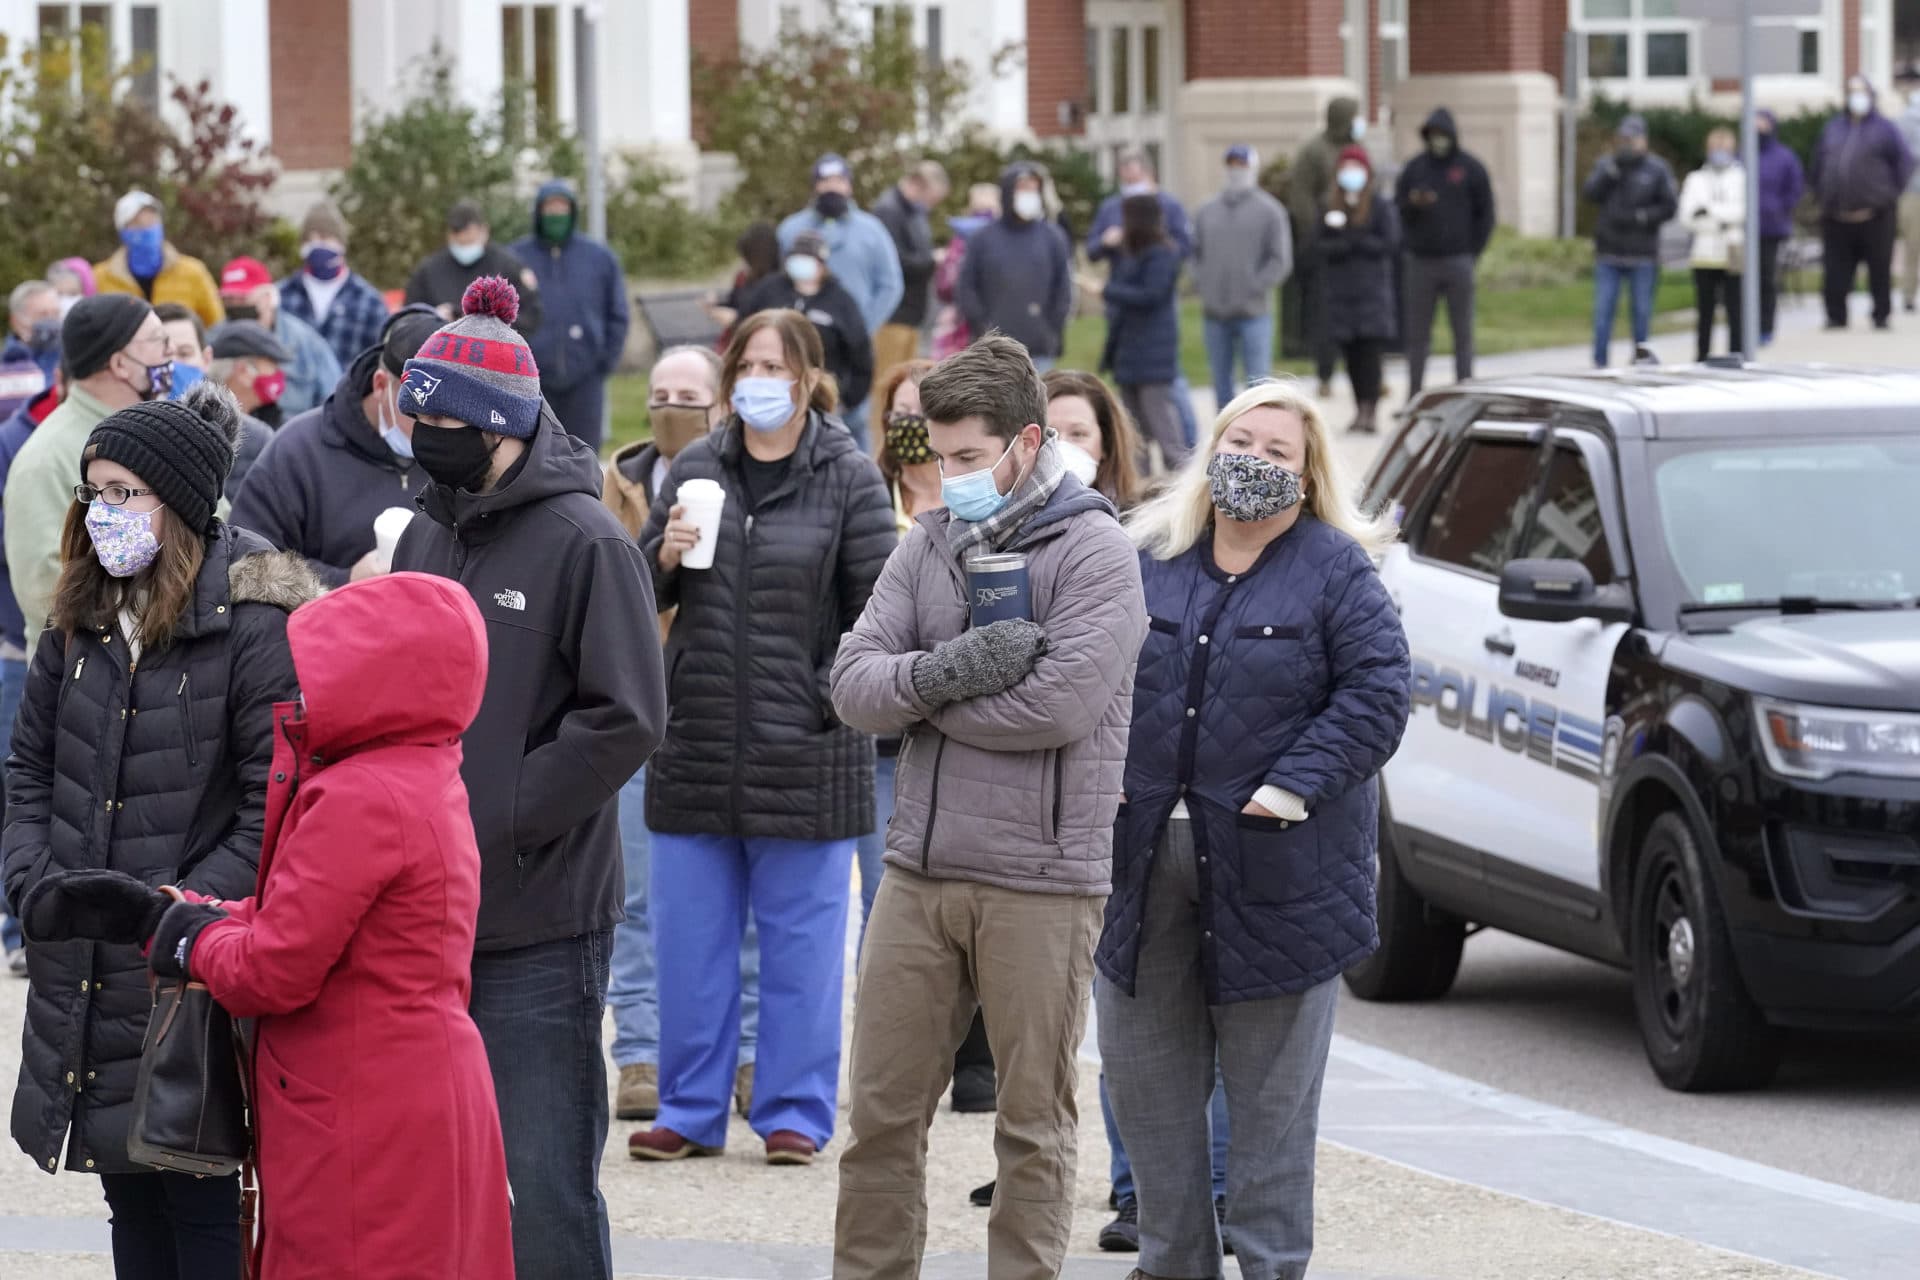 Voters wait in line near a police vehicle outside a polling station at Marshfield High School. (Steven Senne/AP)